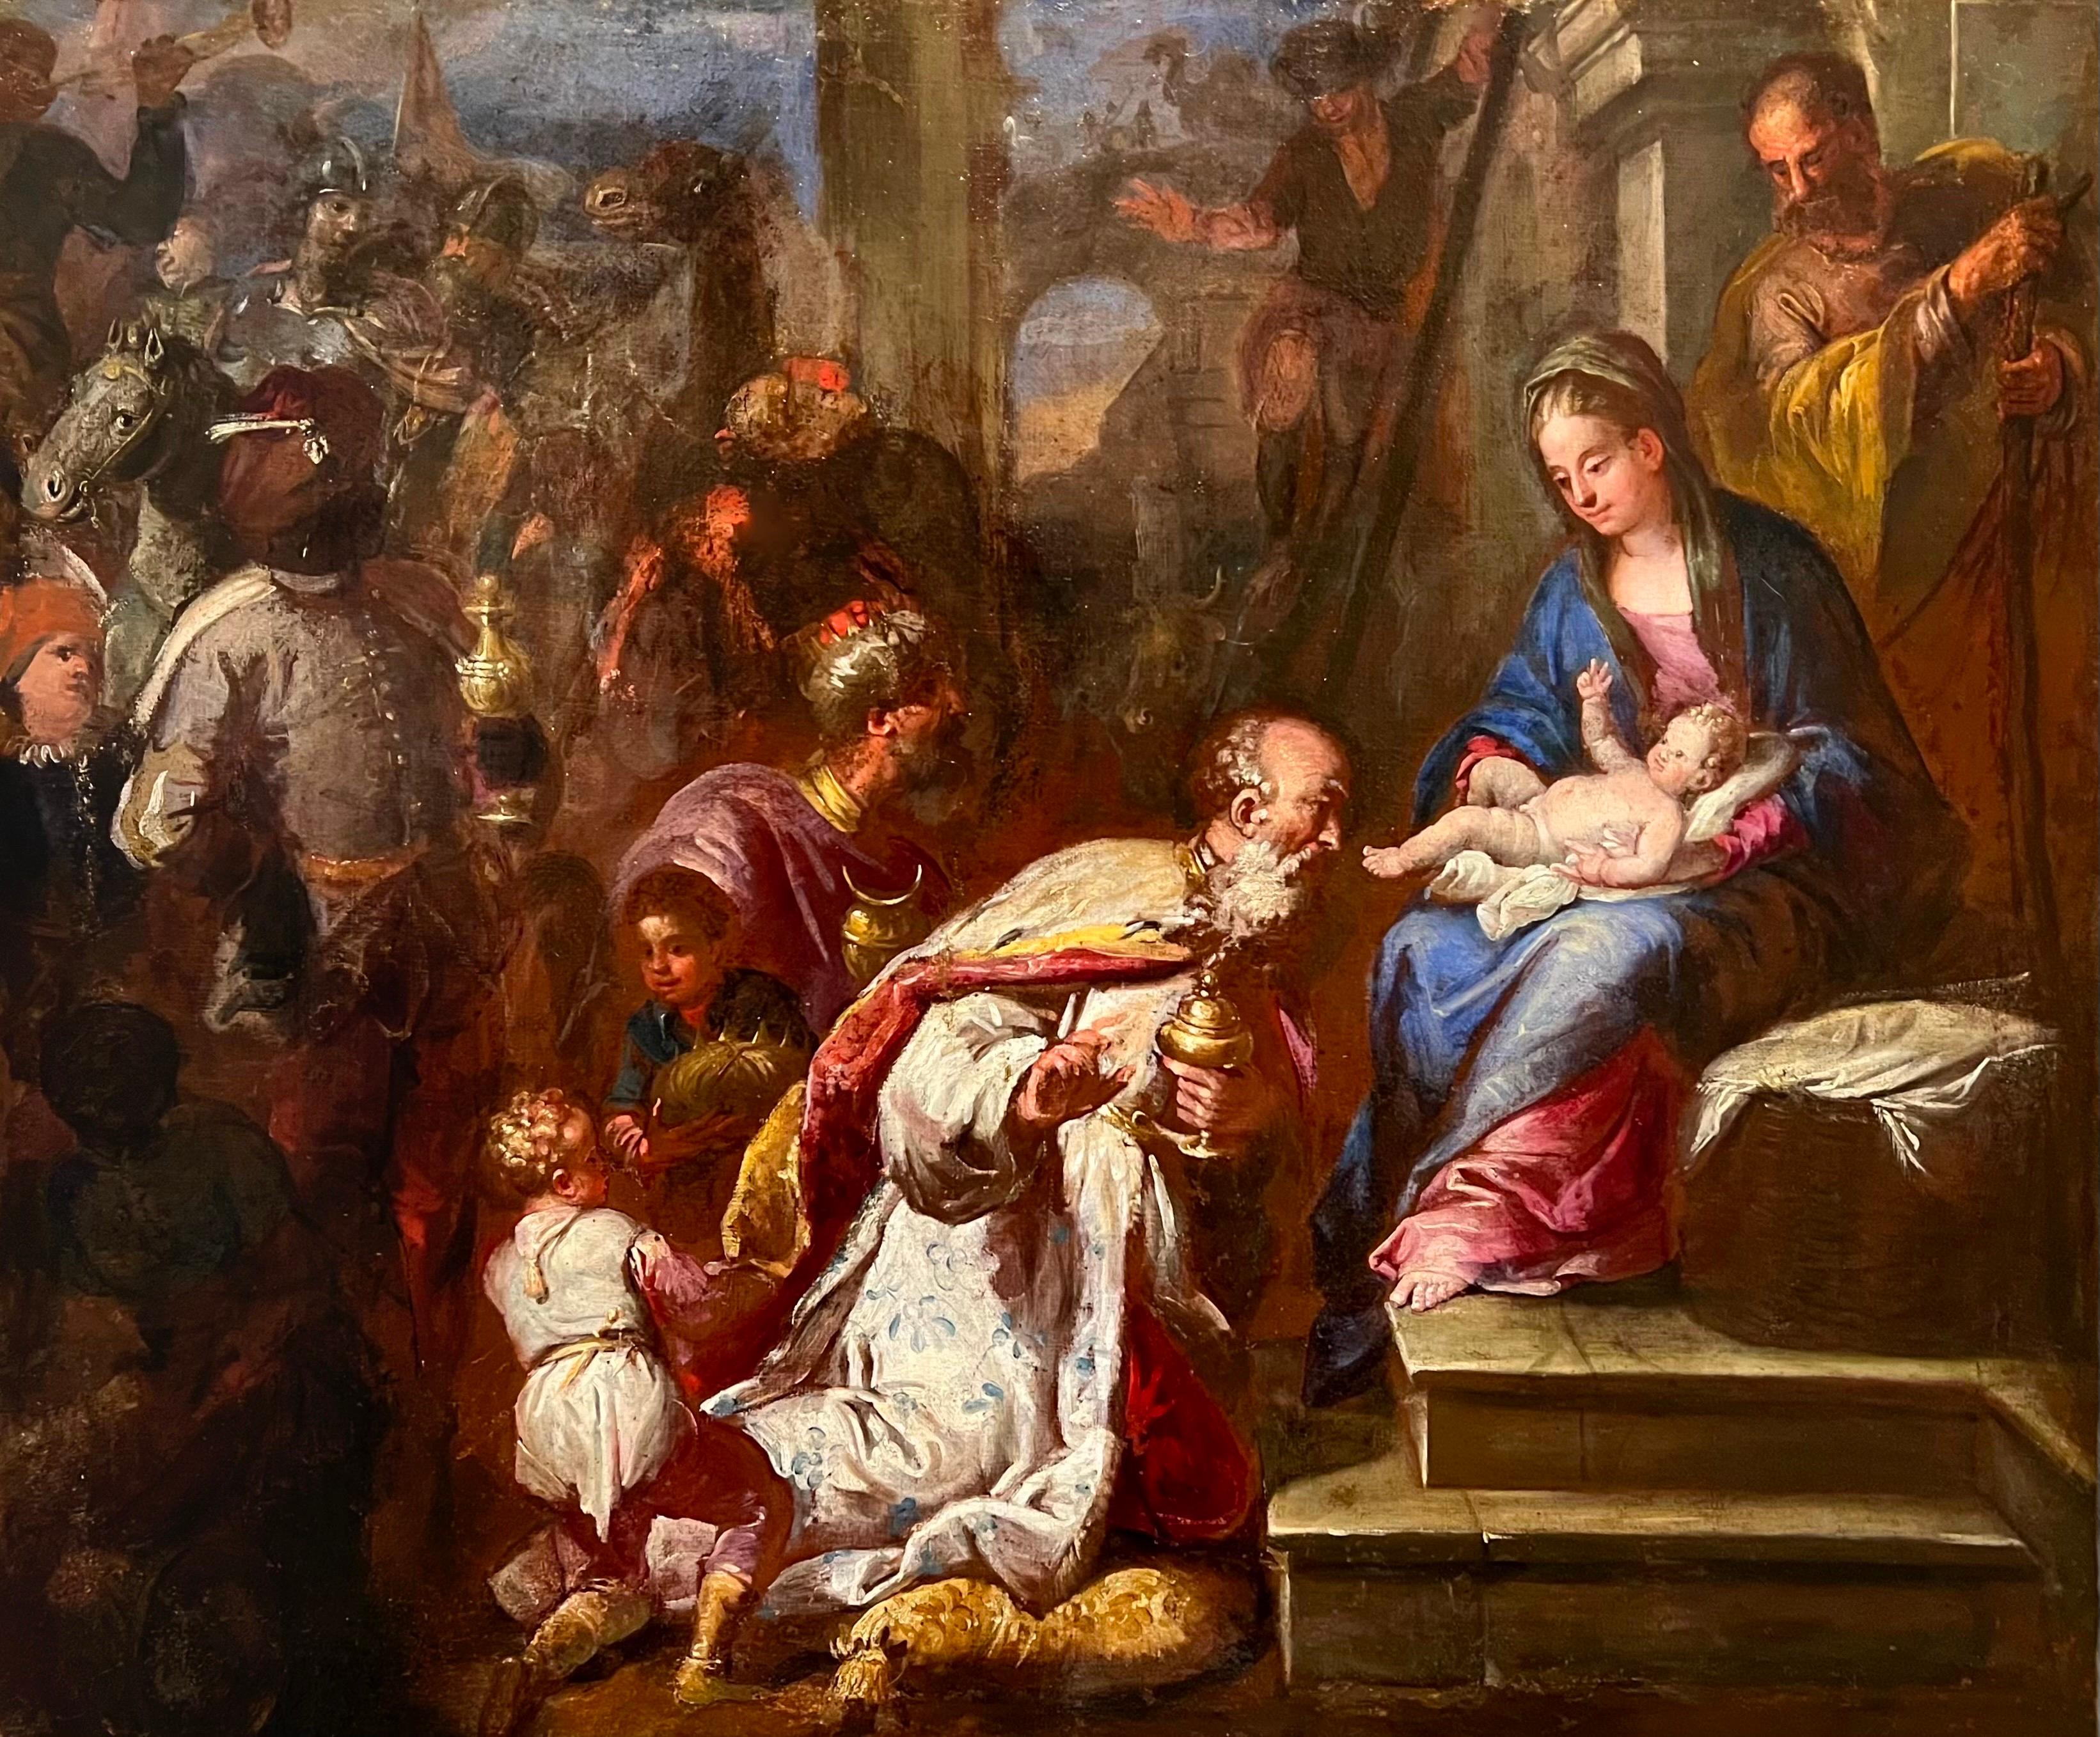 17th century Italian old master painting - Adoration of the Magi - Christmas - Old Masters Painting by Bernardo Strozzi